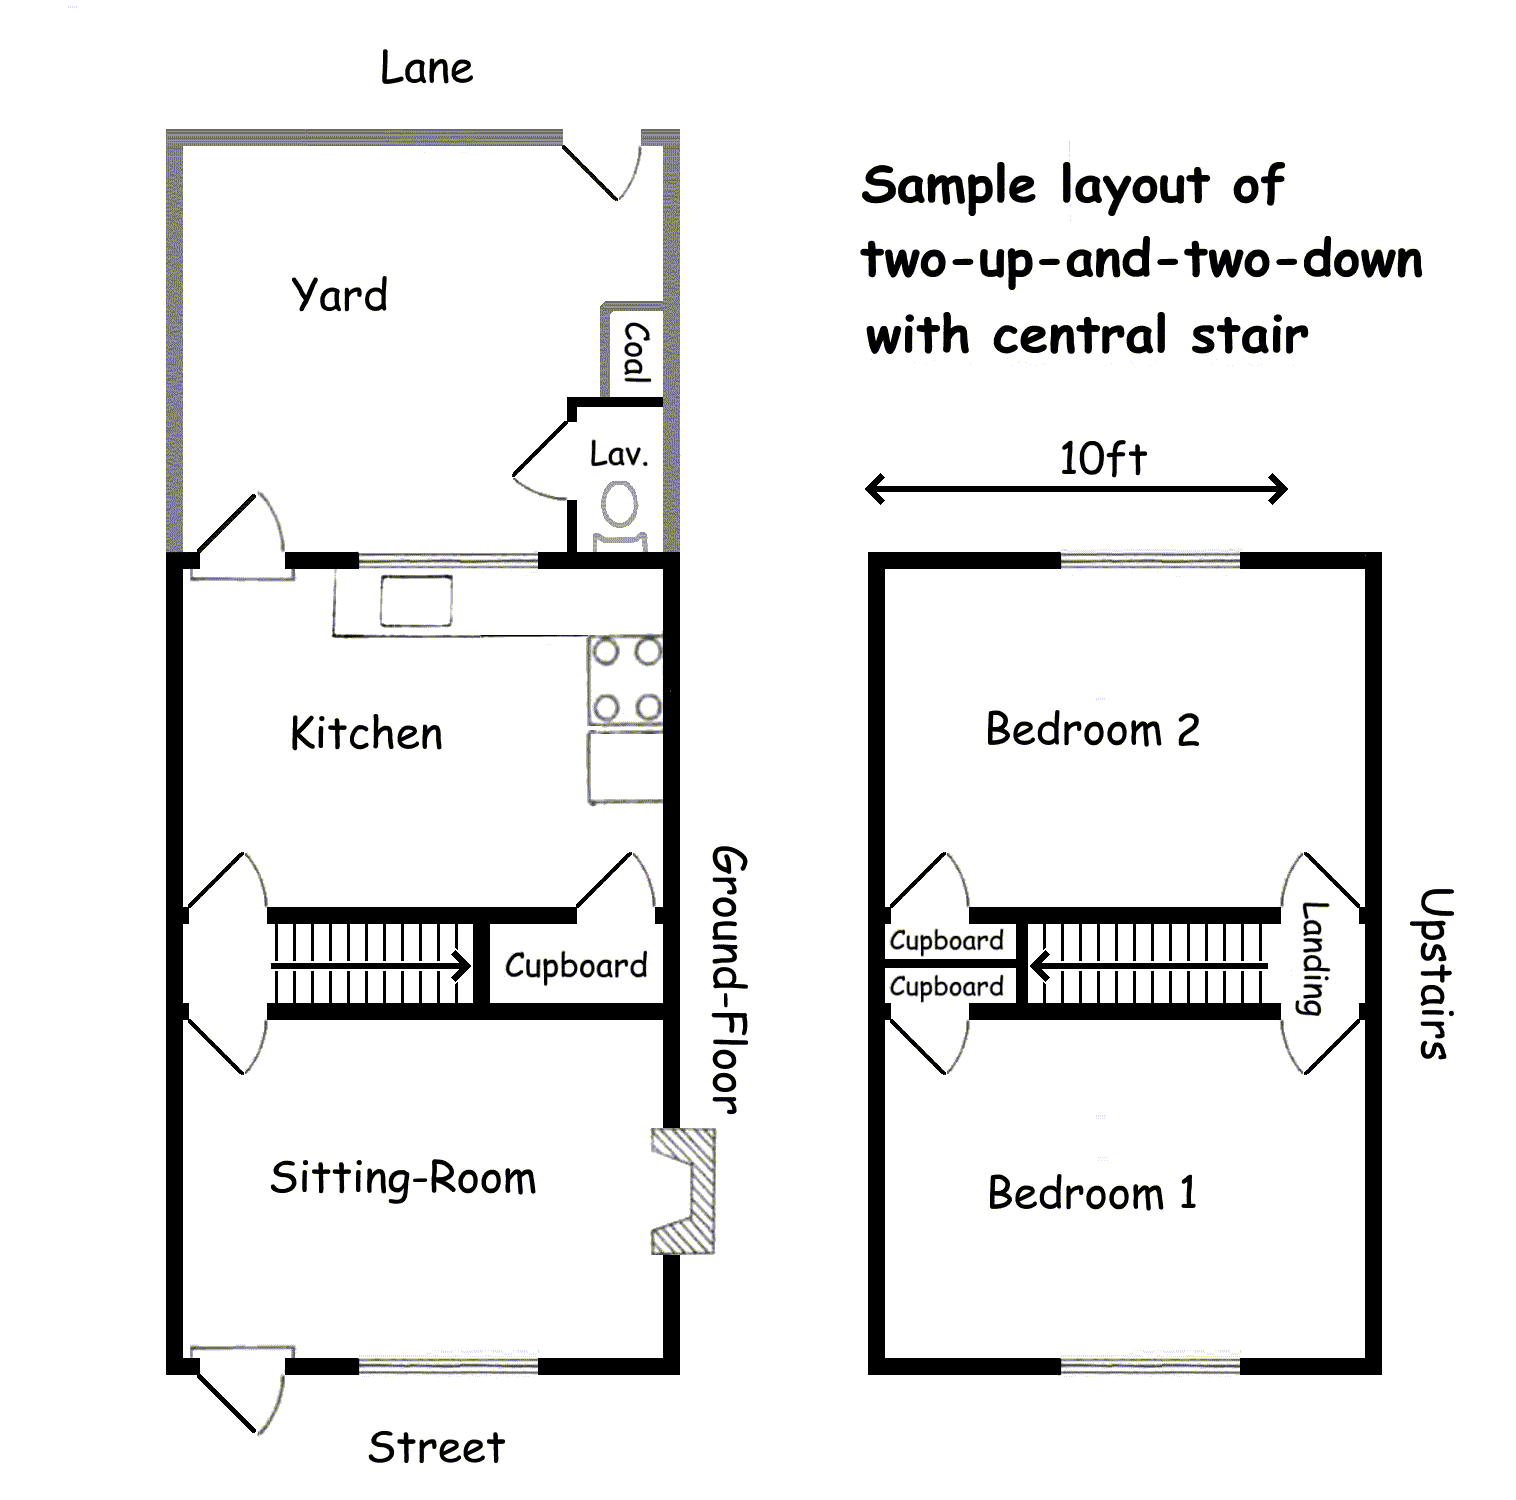 floor-plan of small house with central stair